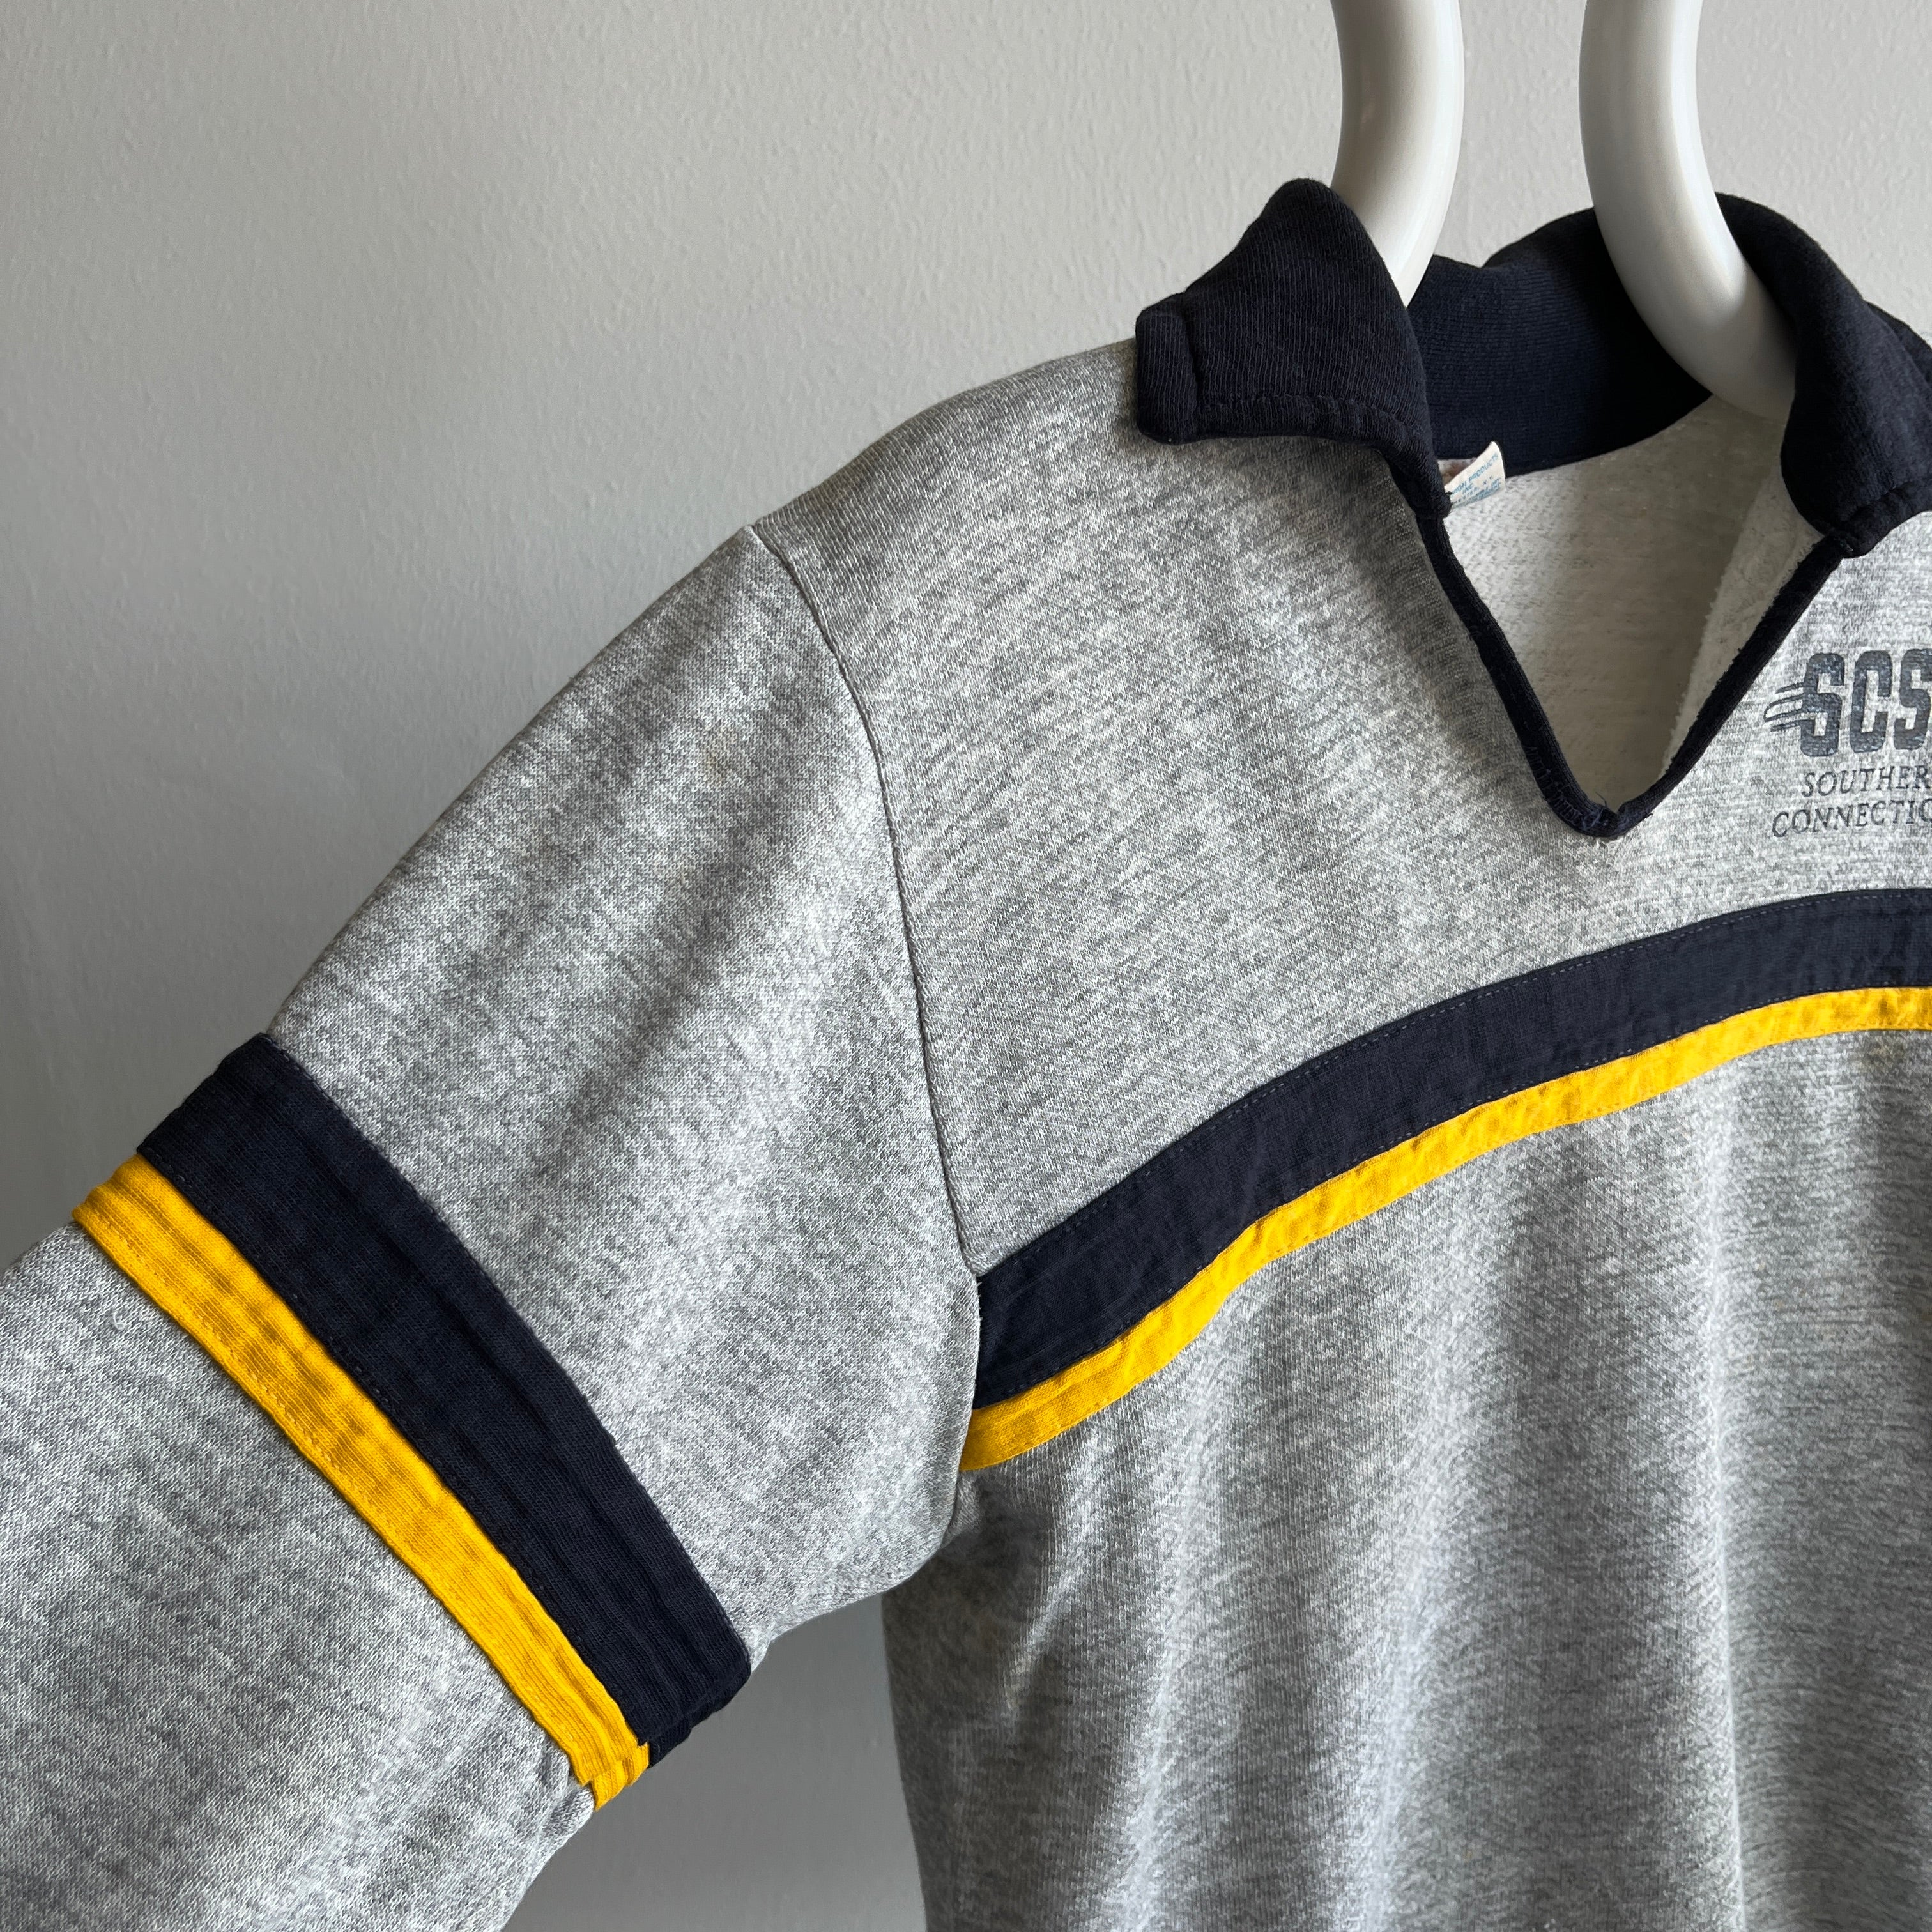 1970s Champion Blue Bar Collectible Tattered, Torn and Super Worn SCSC Southern Connecticut Henley Sweatshirt